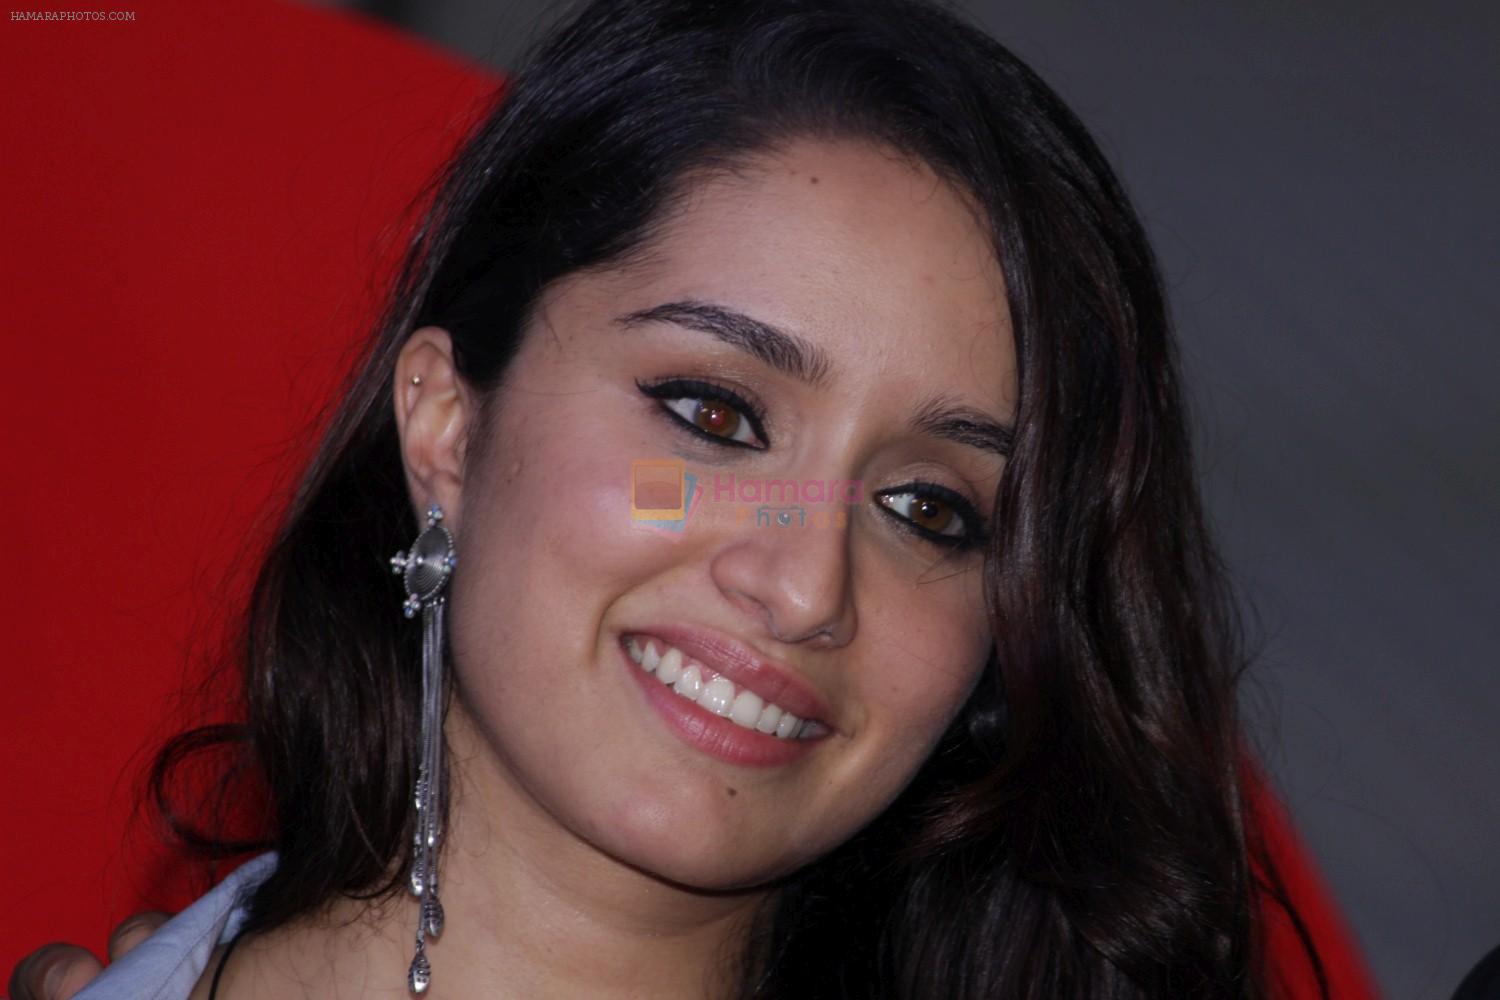 Shraddha Kapoor at the Half Girlfriend Music Concert on 4th May 2017